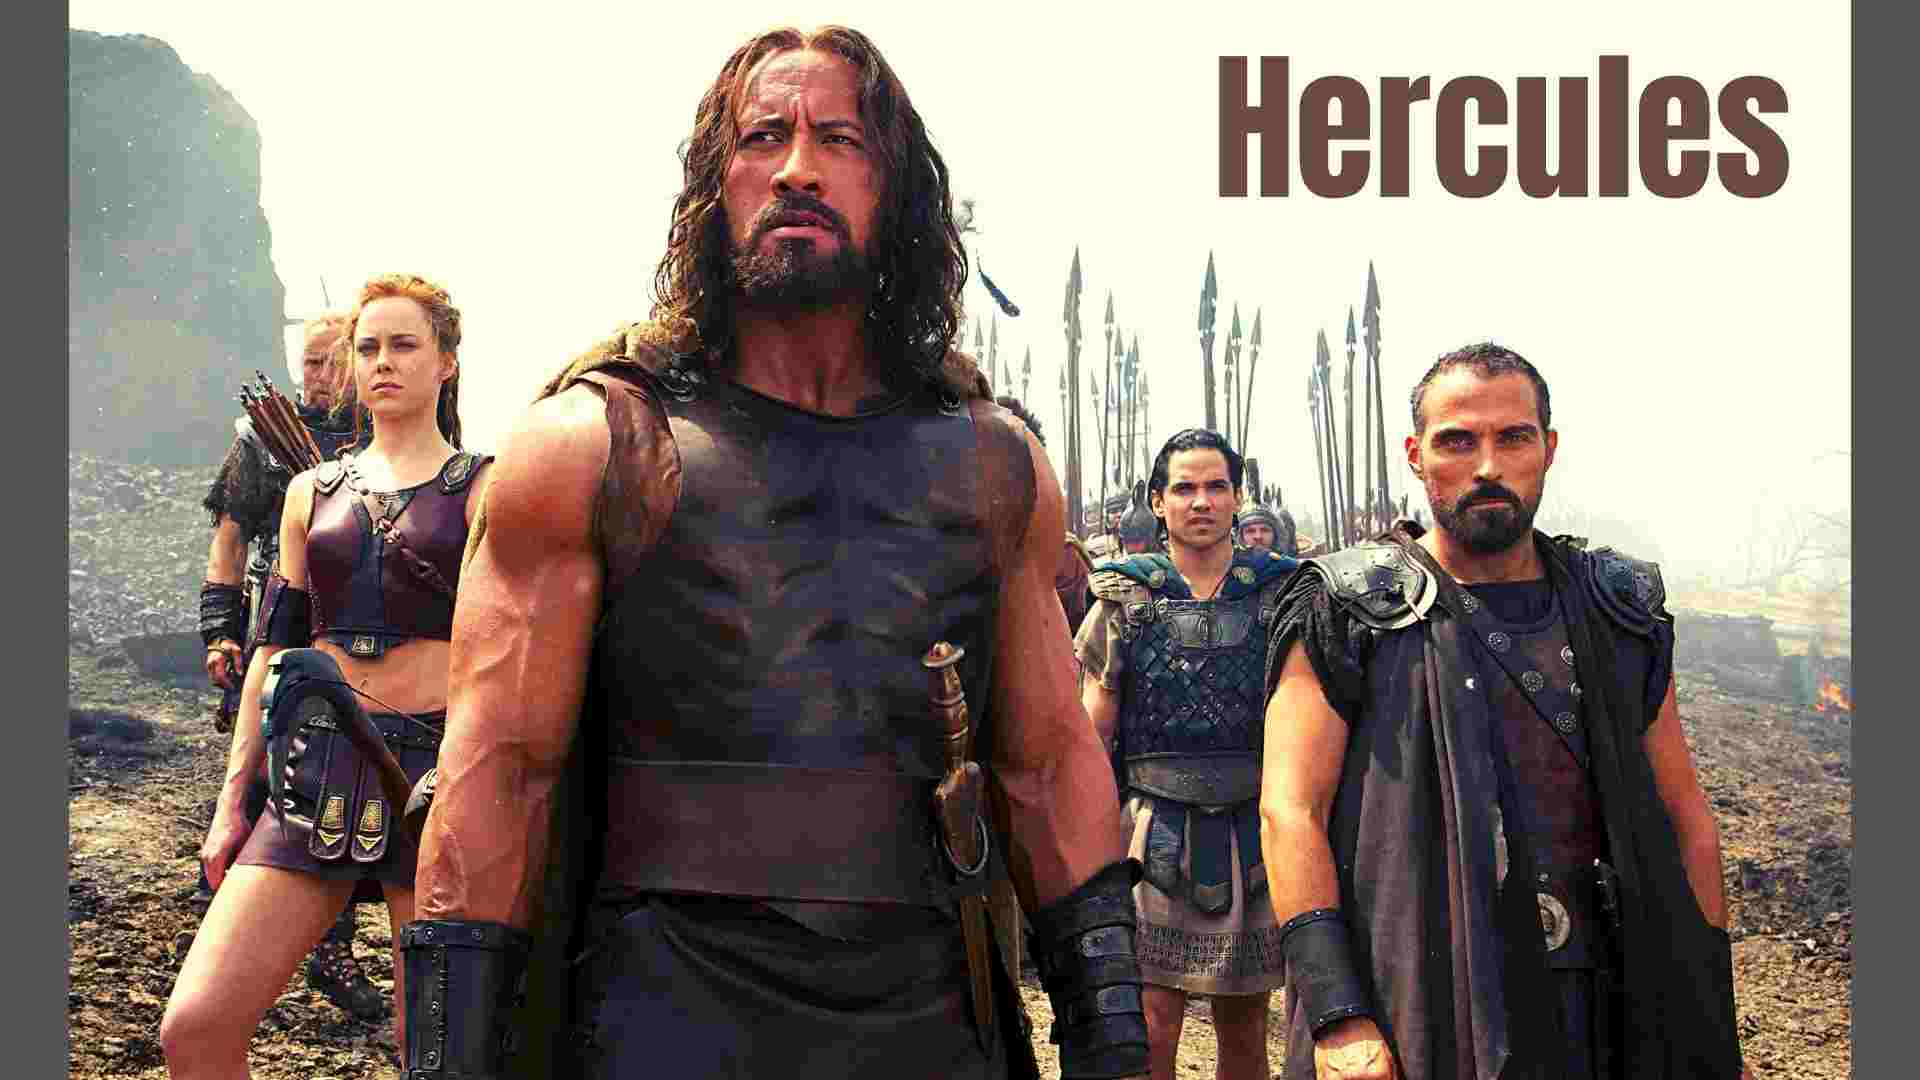 Hercules Wallpapers and Images